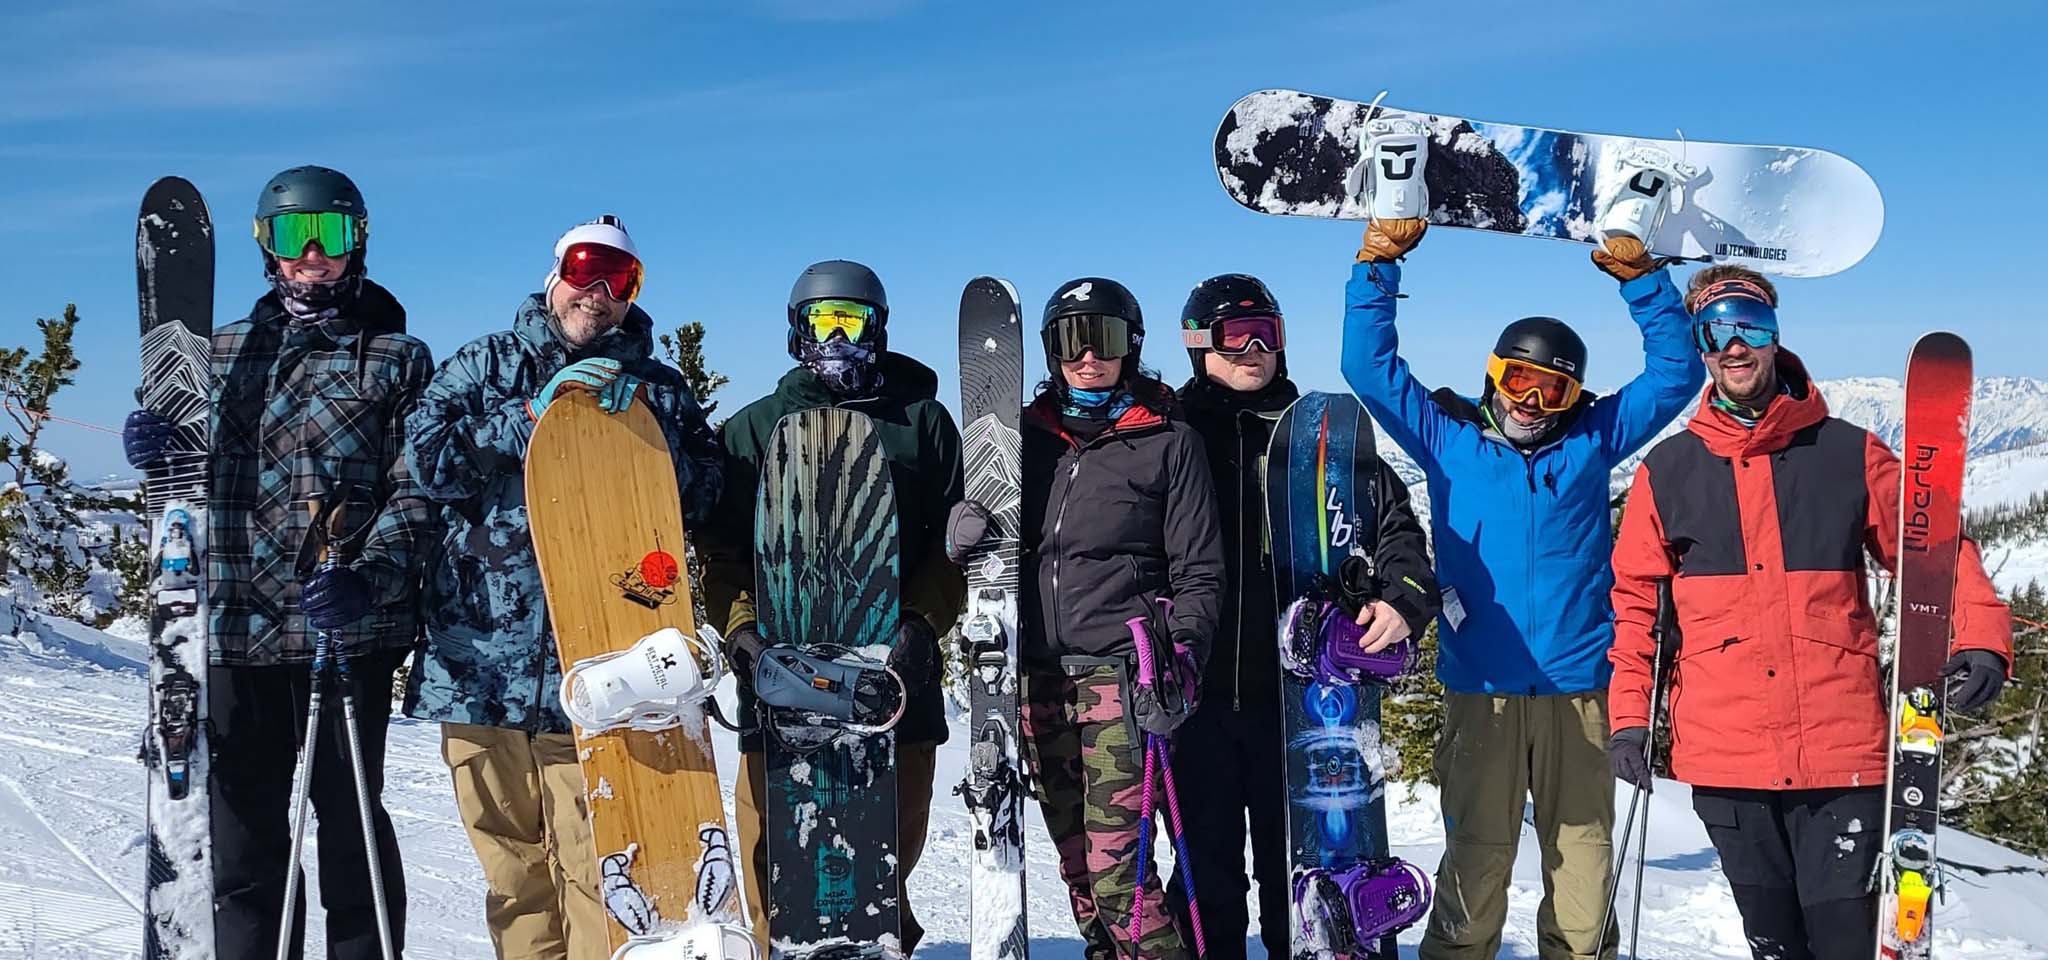 A group of skiers and snowboarders.